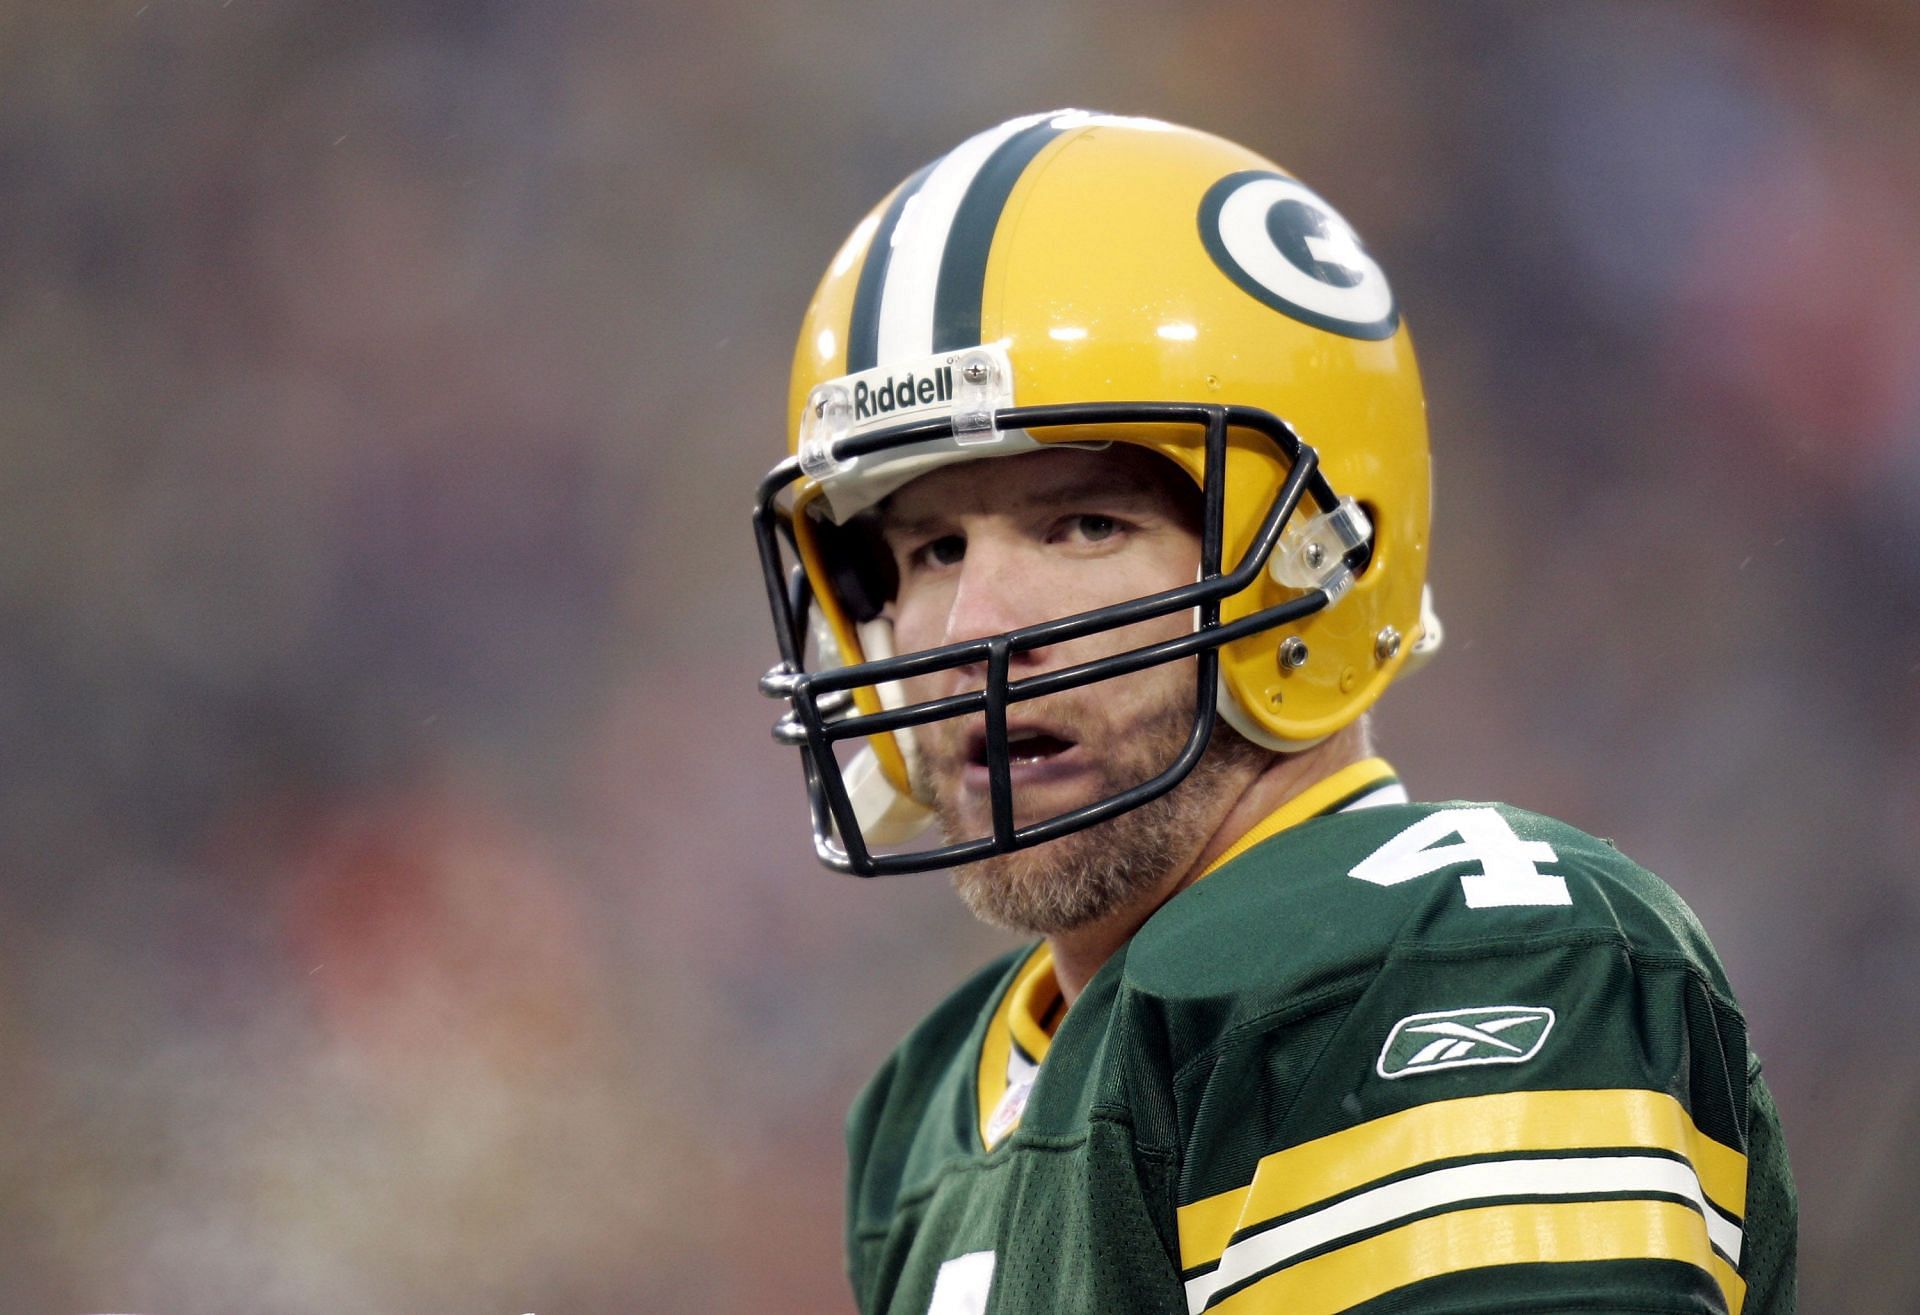 Favre shown during a 2005 NFC playoff game at Lambeau (Photo: Getty)